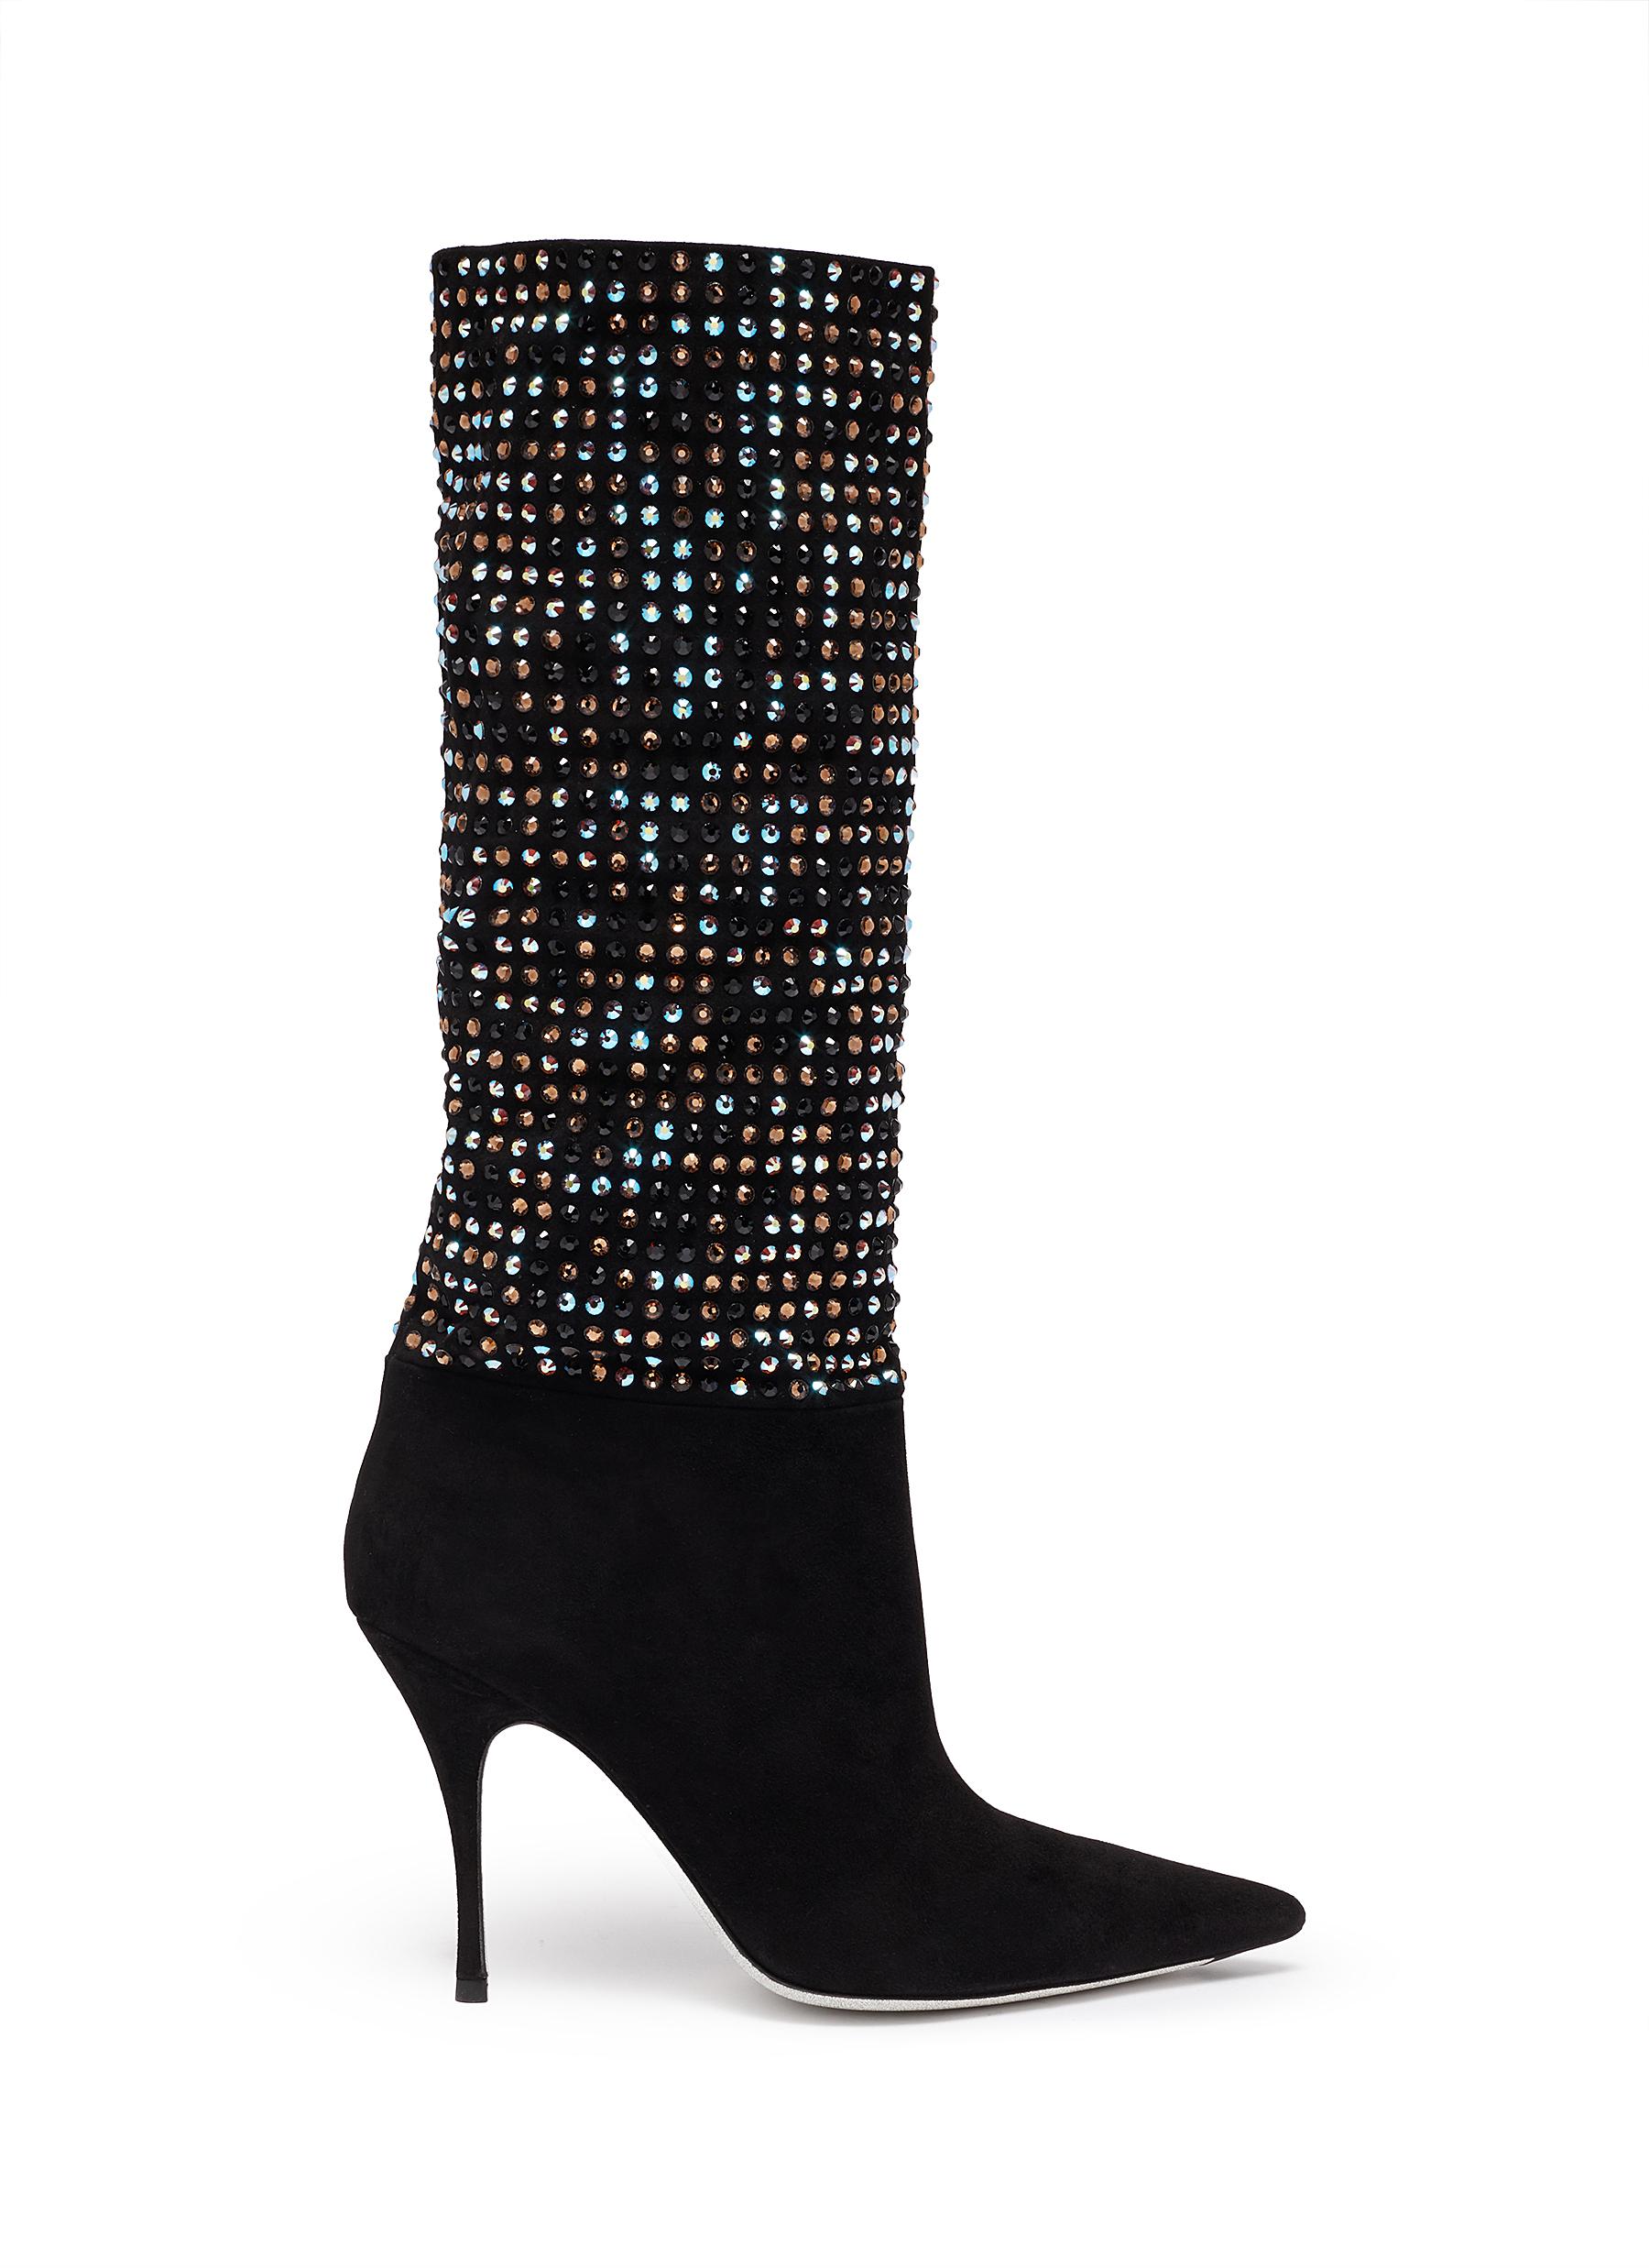 Galaxia smoked topaz strass embellished mid boot by René Caovilla